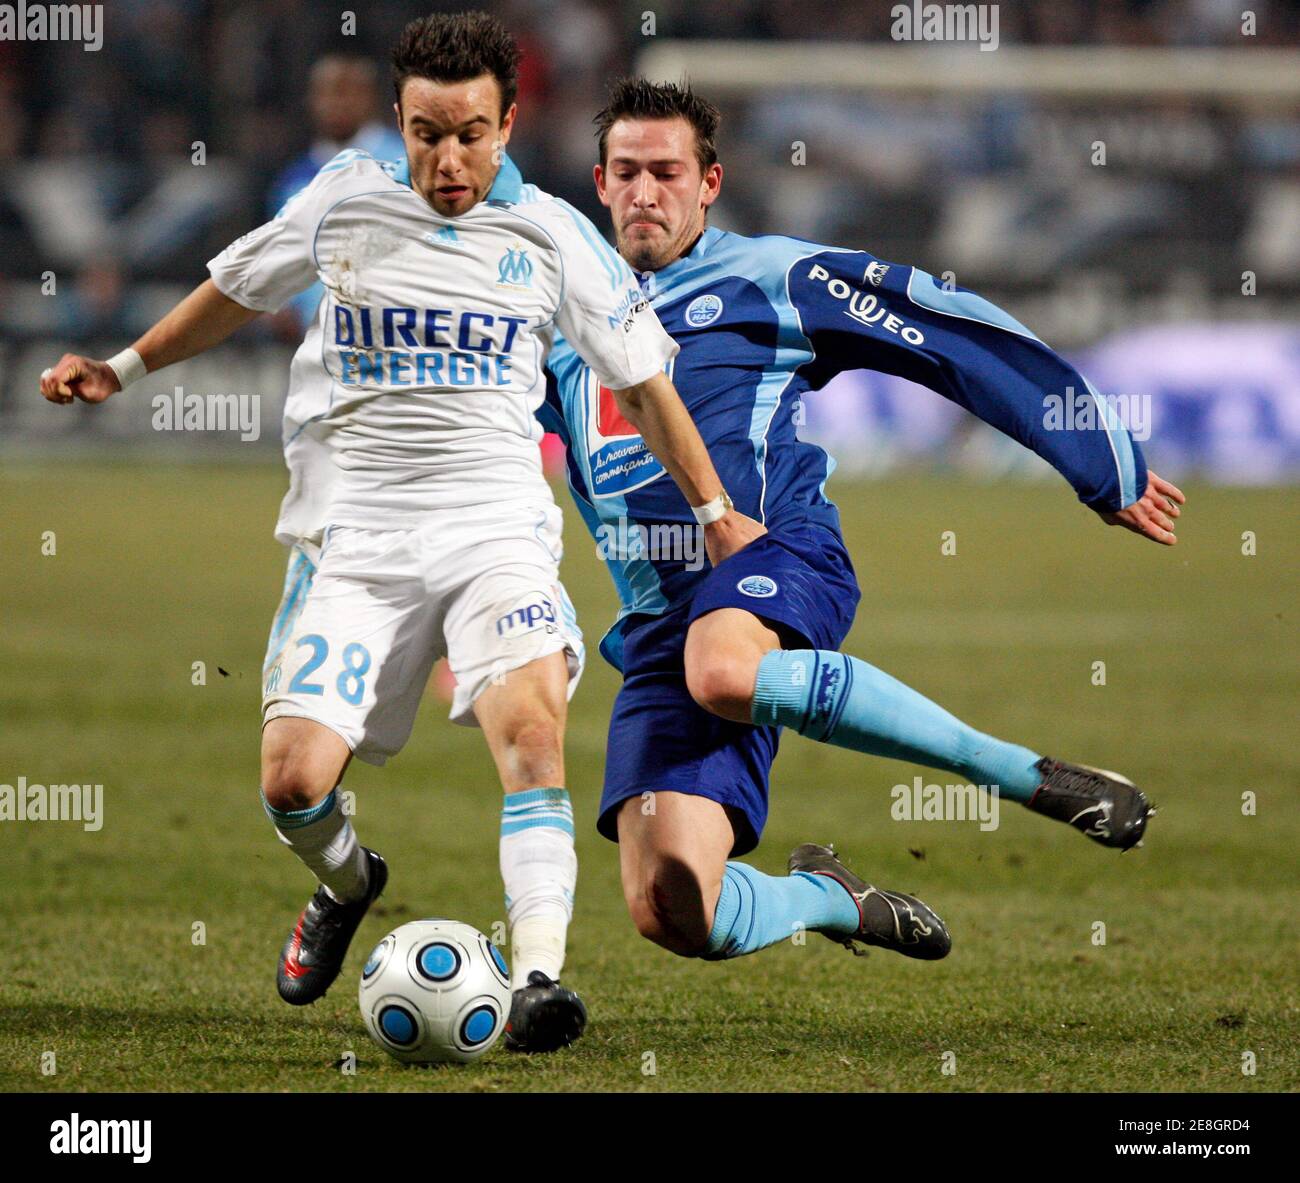 Olympique Marseille's Mathieu Valbuena challenges Le Havre's Peter  Franquart (R) during their French Ligue 1 soccer match at the Velodrome  stadium in Marseille, January 17, 2009. REUTERS/Jean-Paul Pelissier (FRANCE  Stock Photo - Alamy